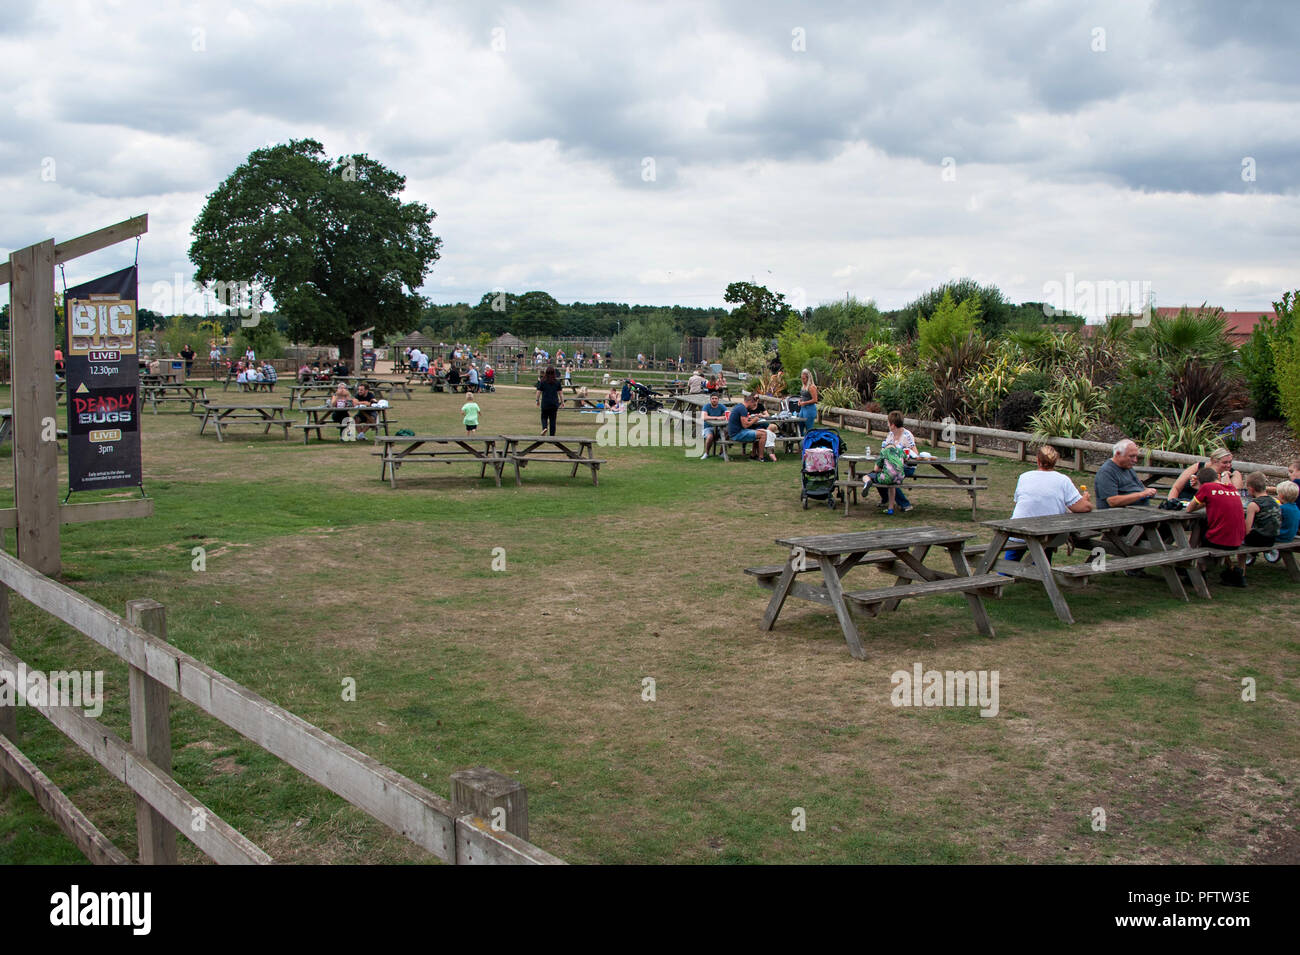 People sitting at the picnic area with tables and seating for visitors at the Yorkshire Wildlife Park, Doncaster, South Yorkshire UK Stock Photo